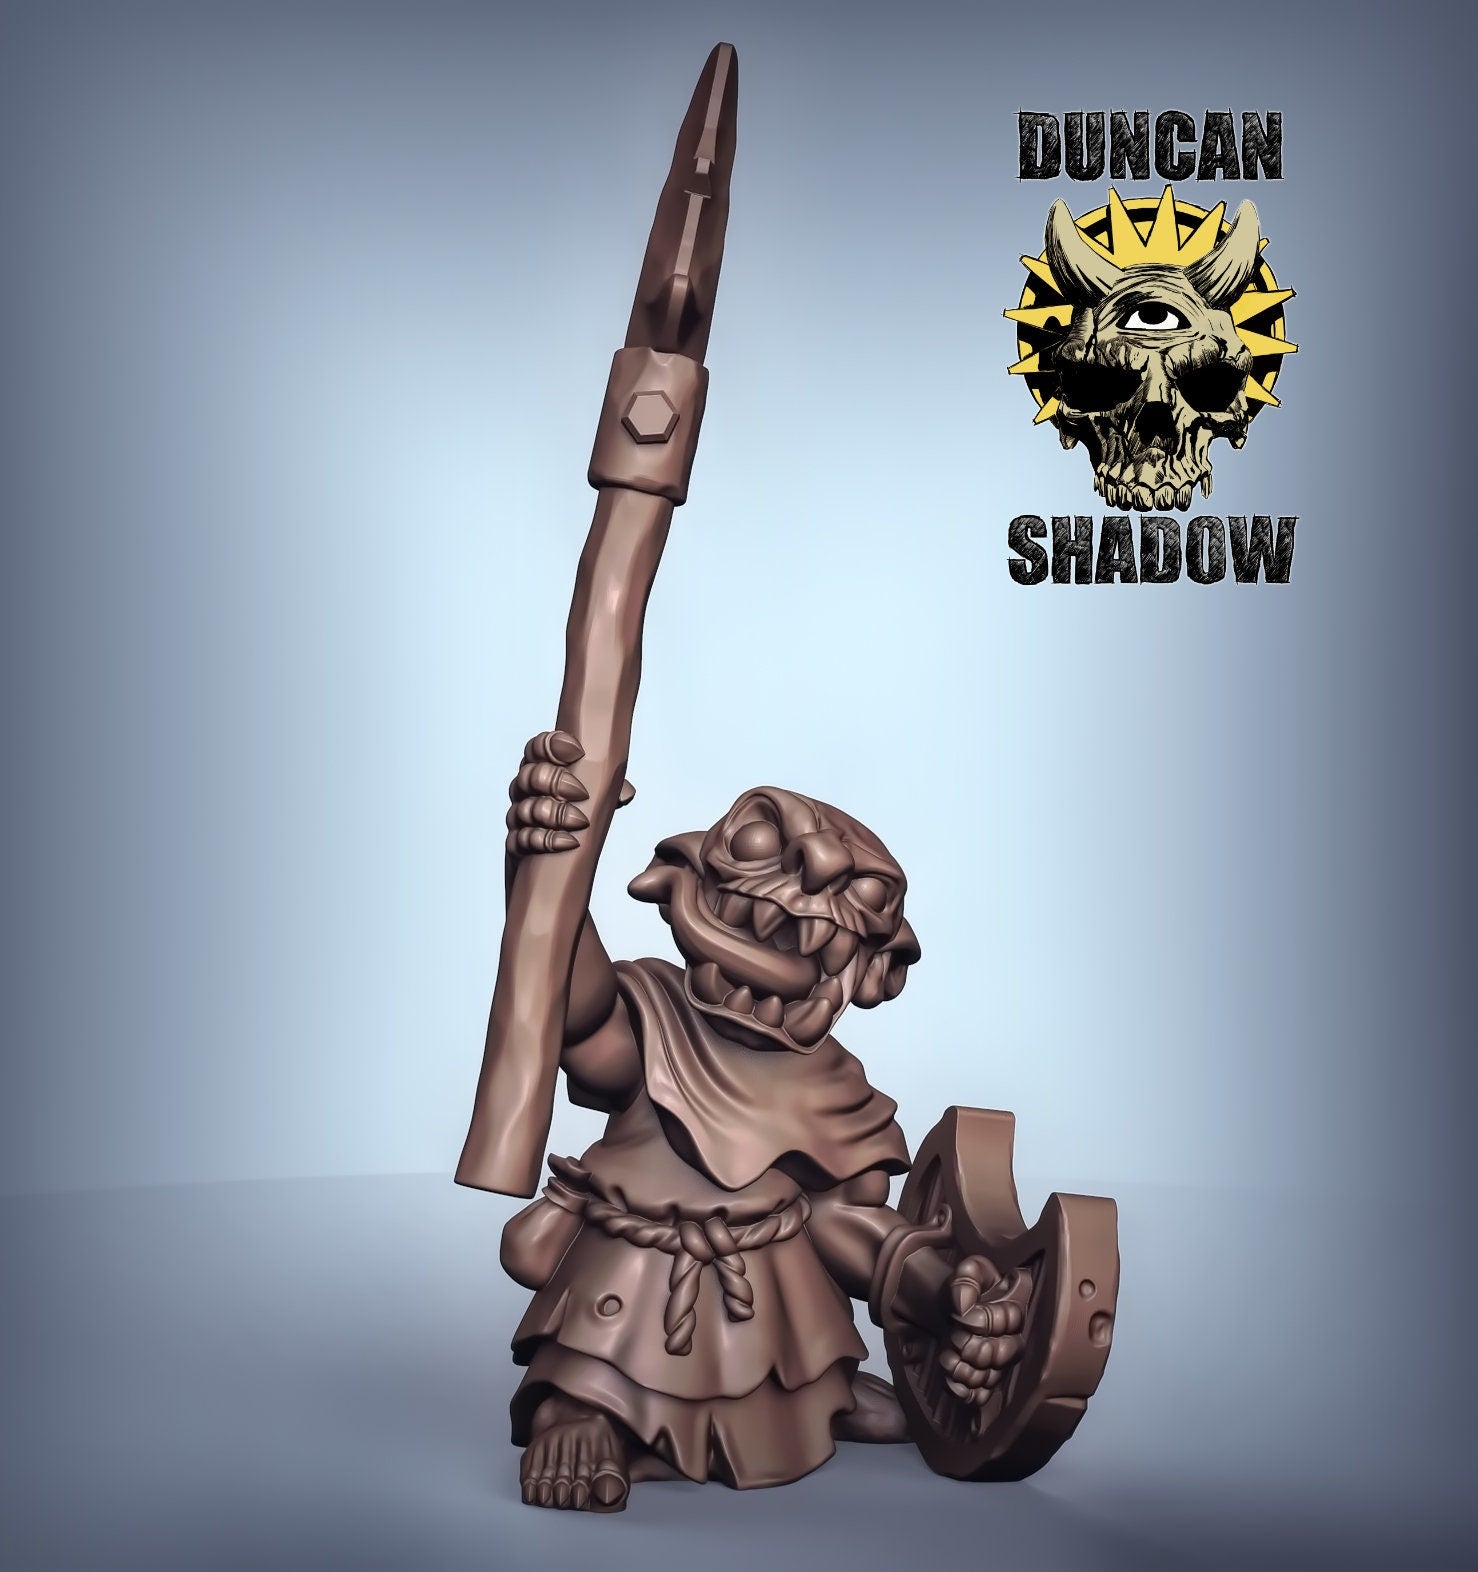 Goblins with Spears - 3 Duncan Shadow Printed Miniatures | Dungeons & Dragons | Pathfinder | Tabletop